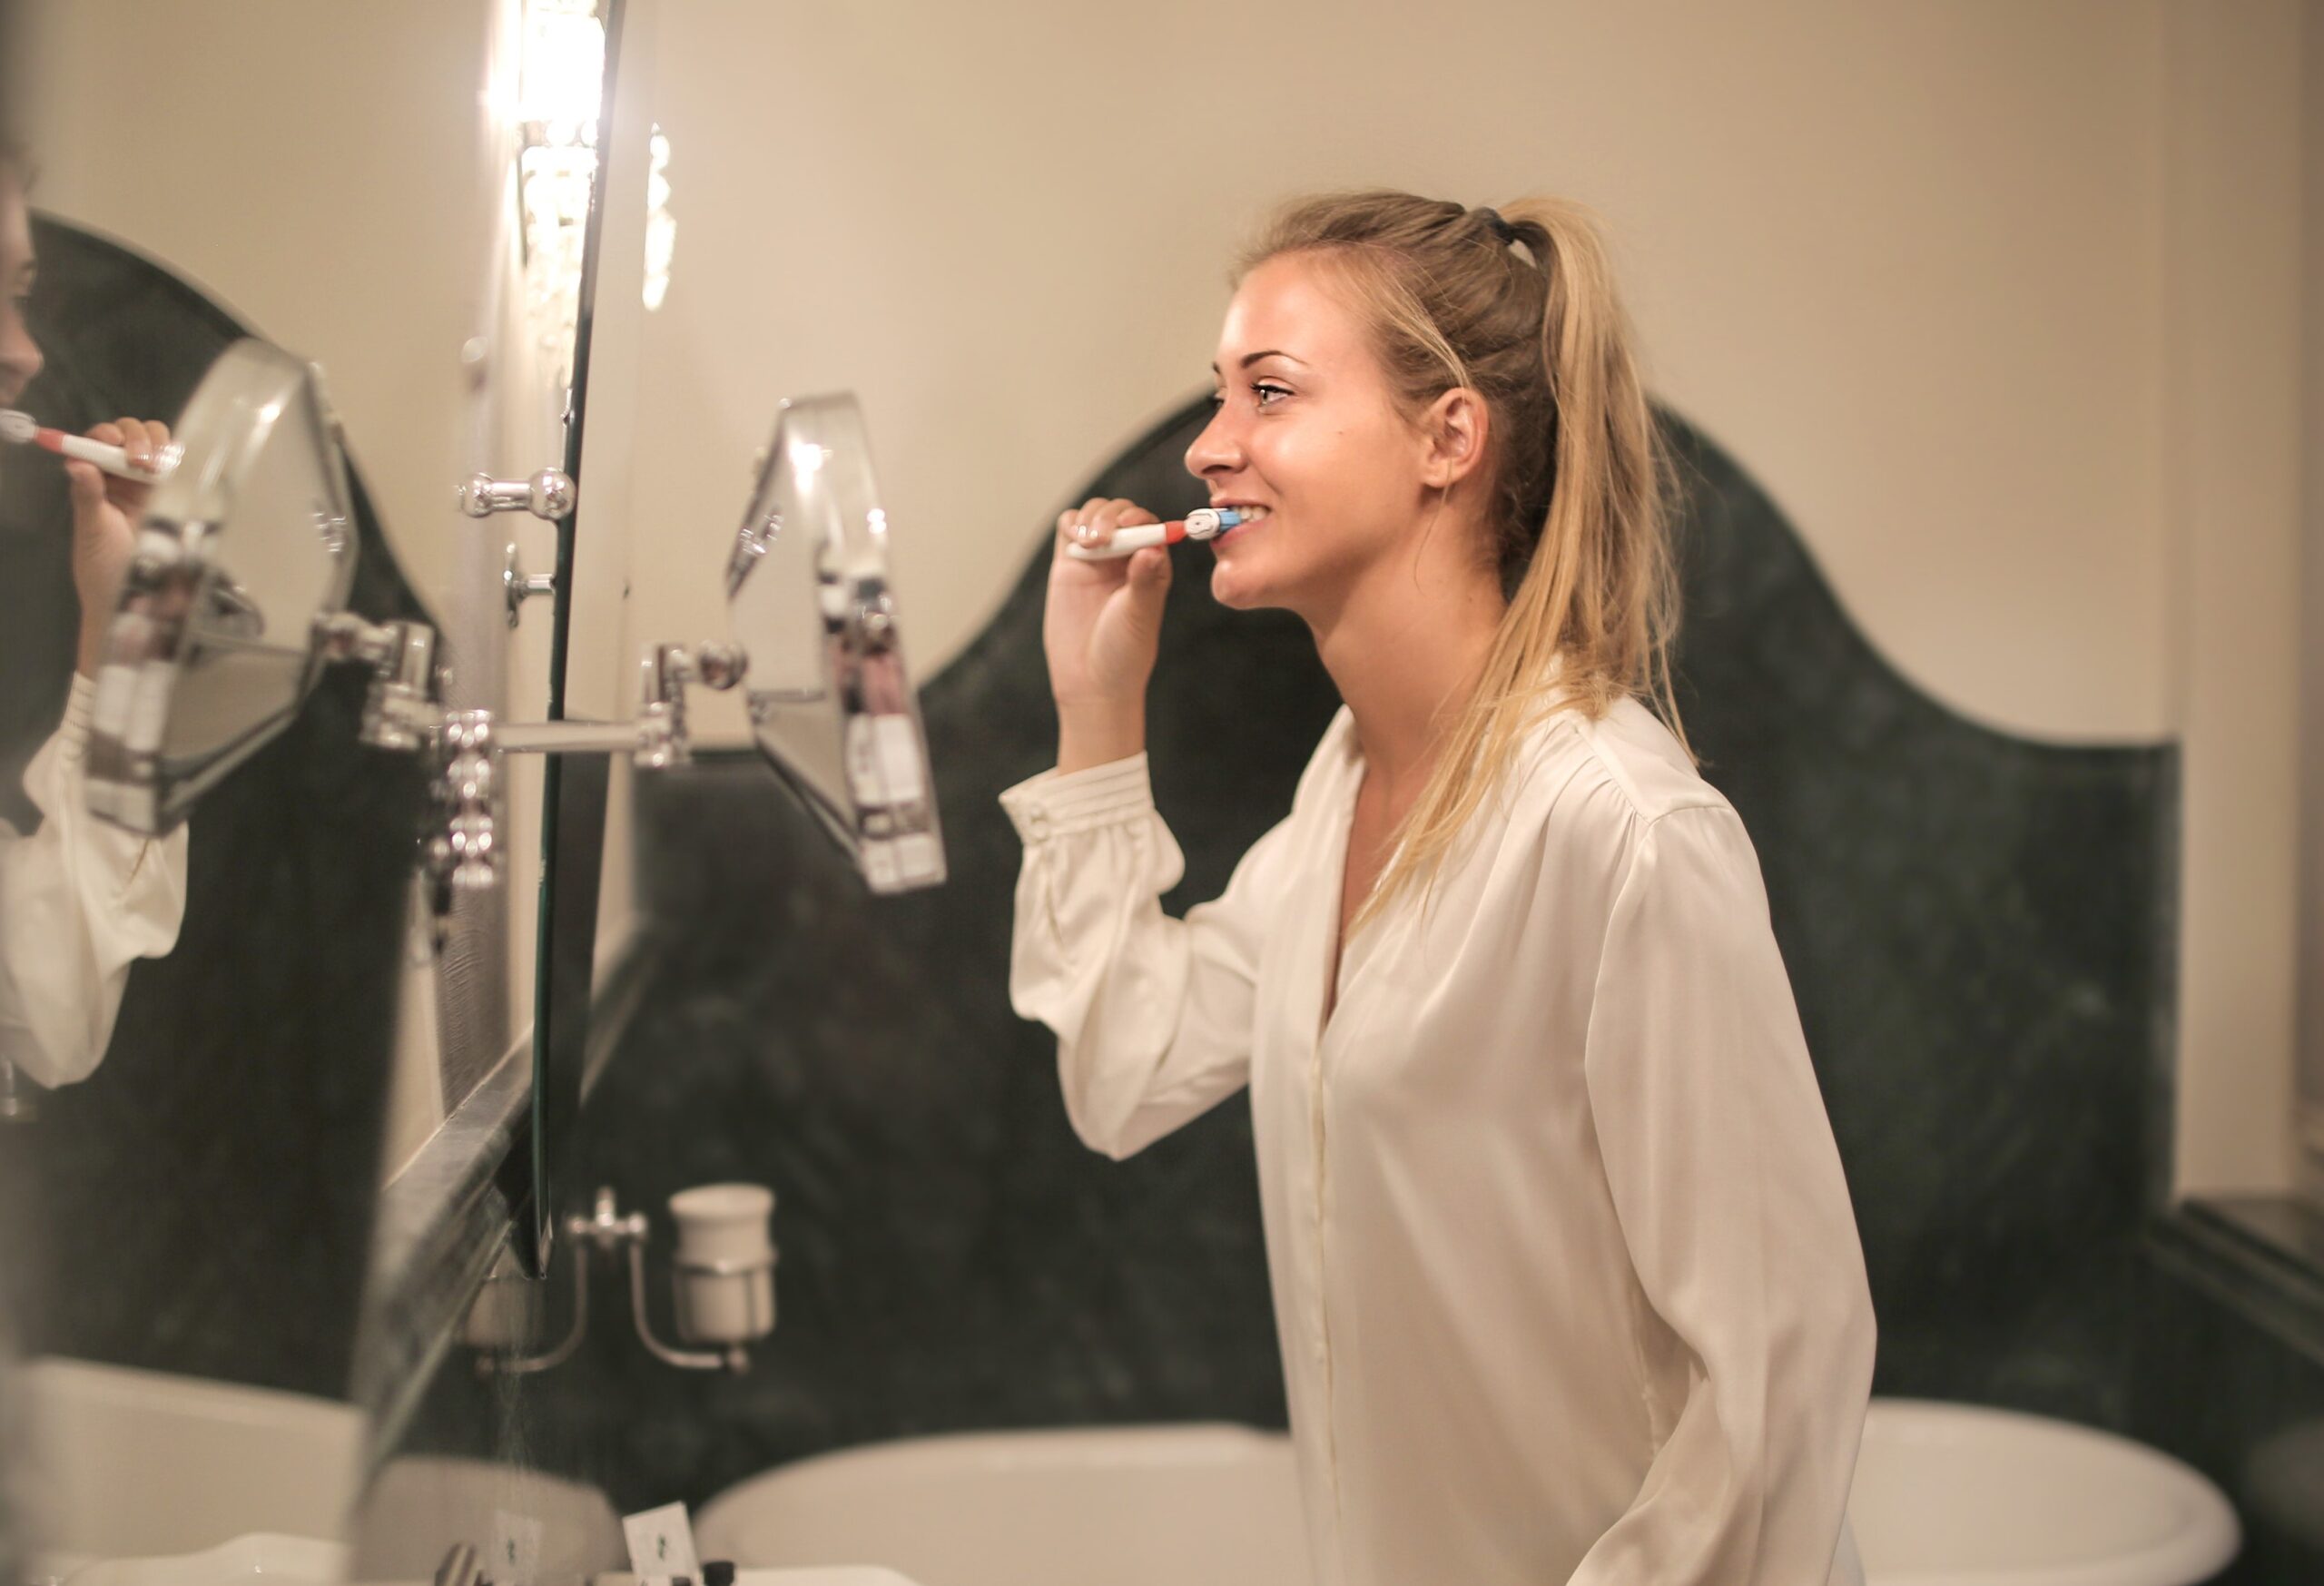 A blonde woman standing in front of the bathroom mirror brushing her teeth